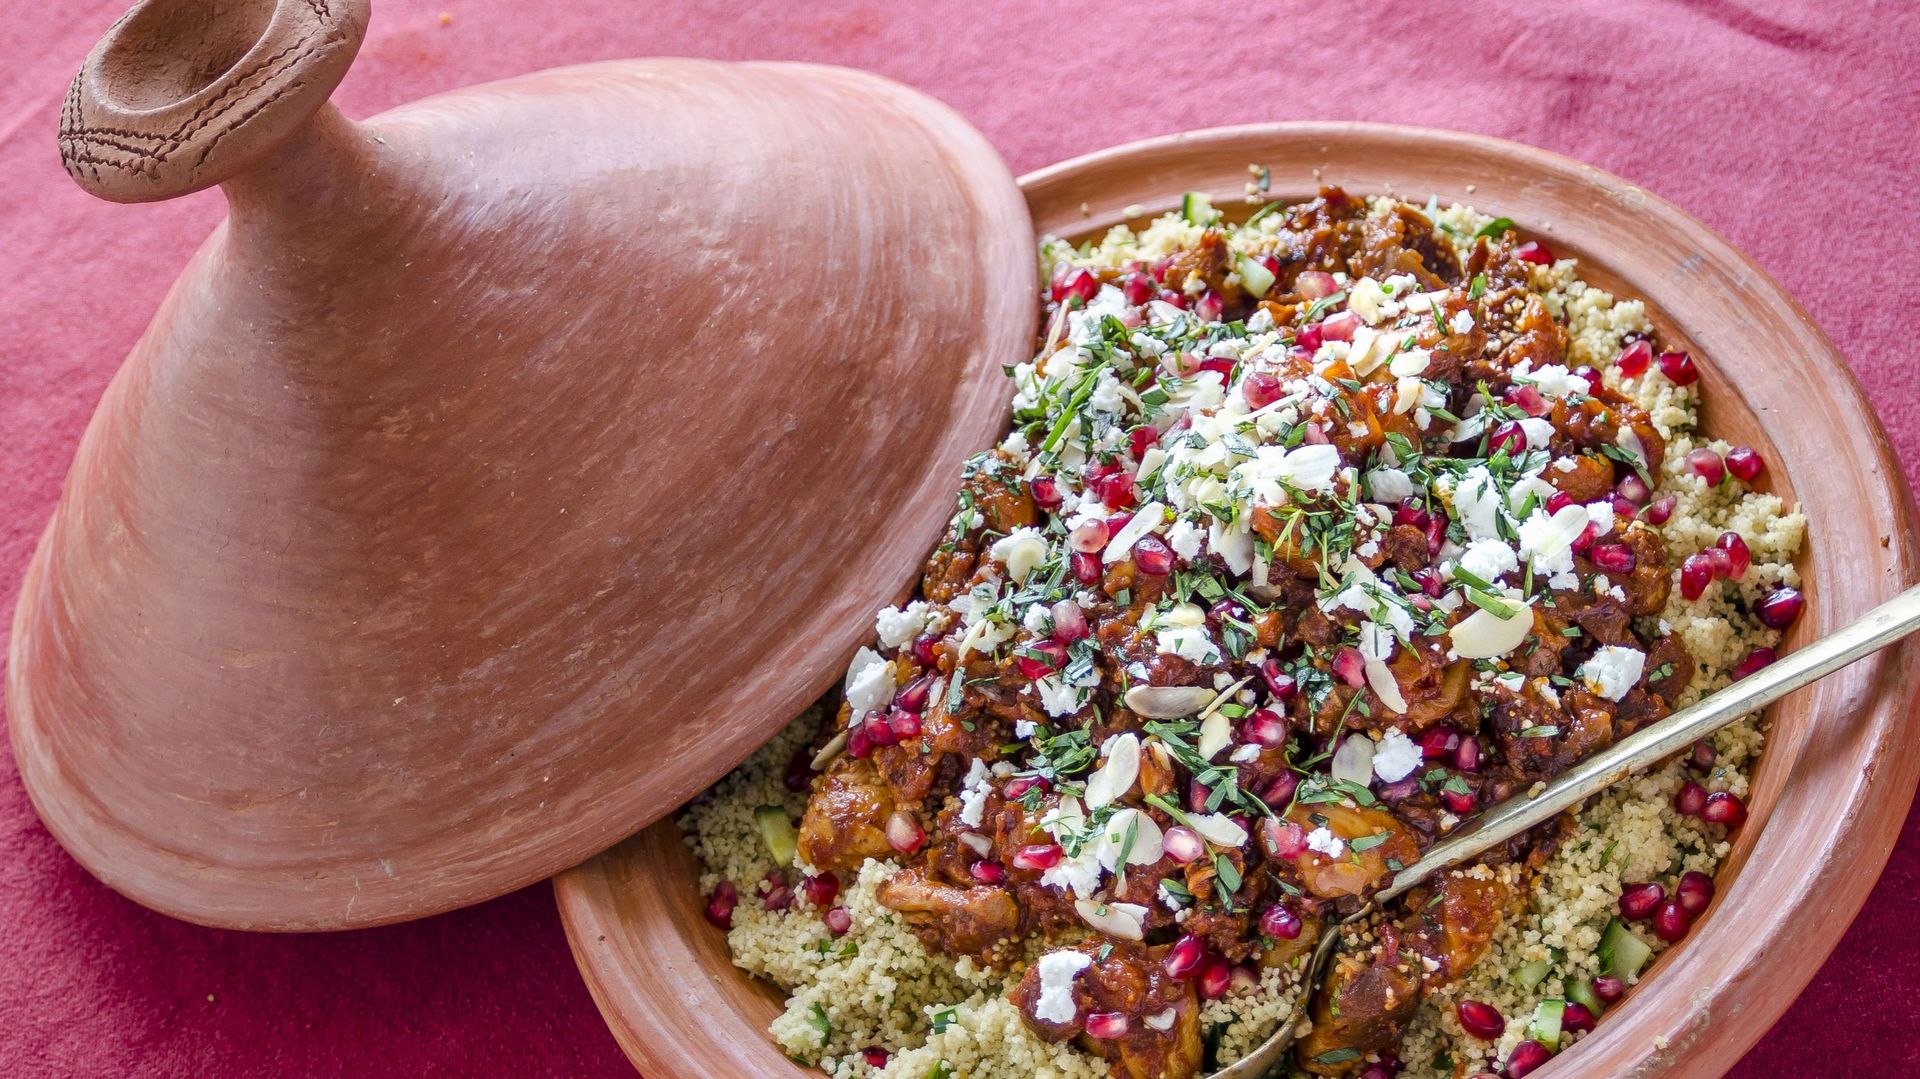 Chicken cous cous tagine with pomegranate seeds, feta cheese and herbs in a terracotta tagine with a serving spoon on a red tablecloth